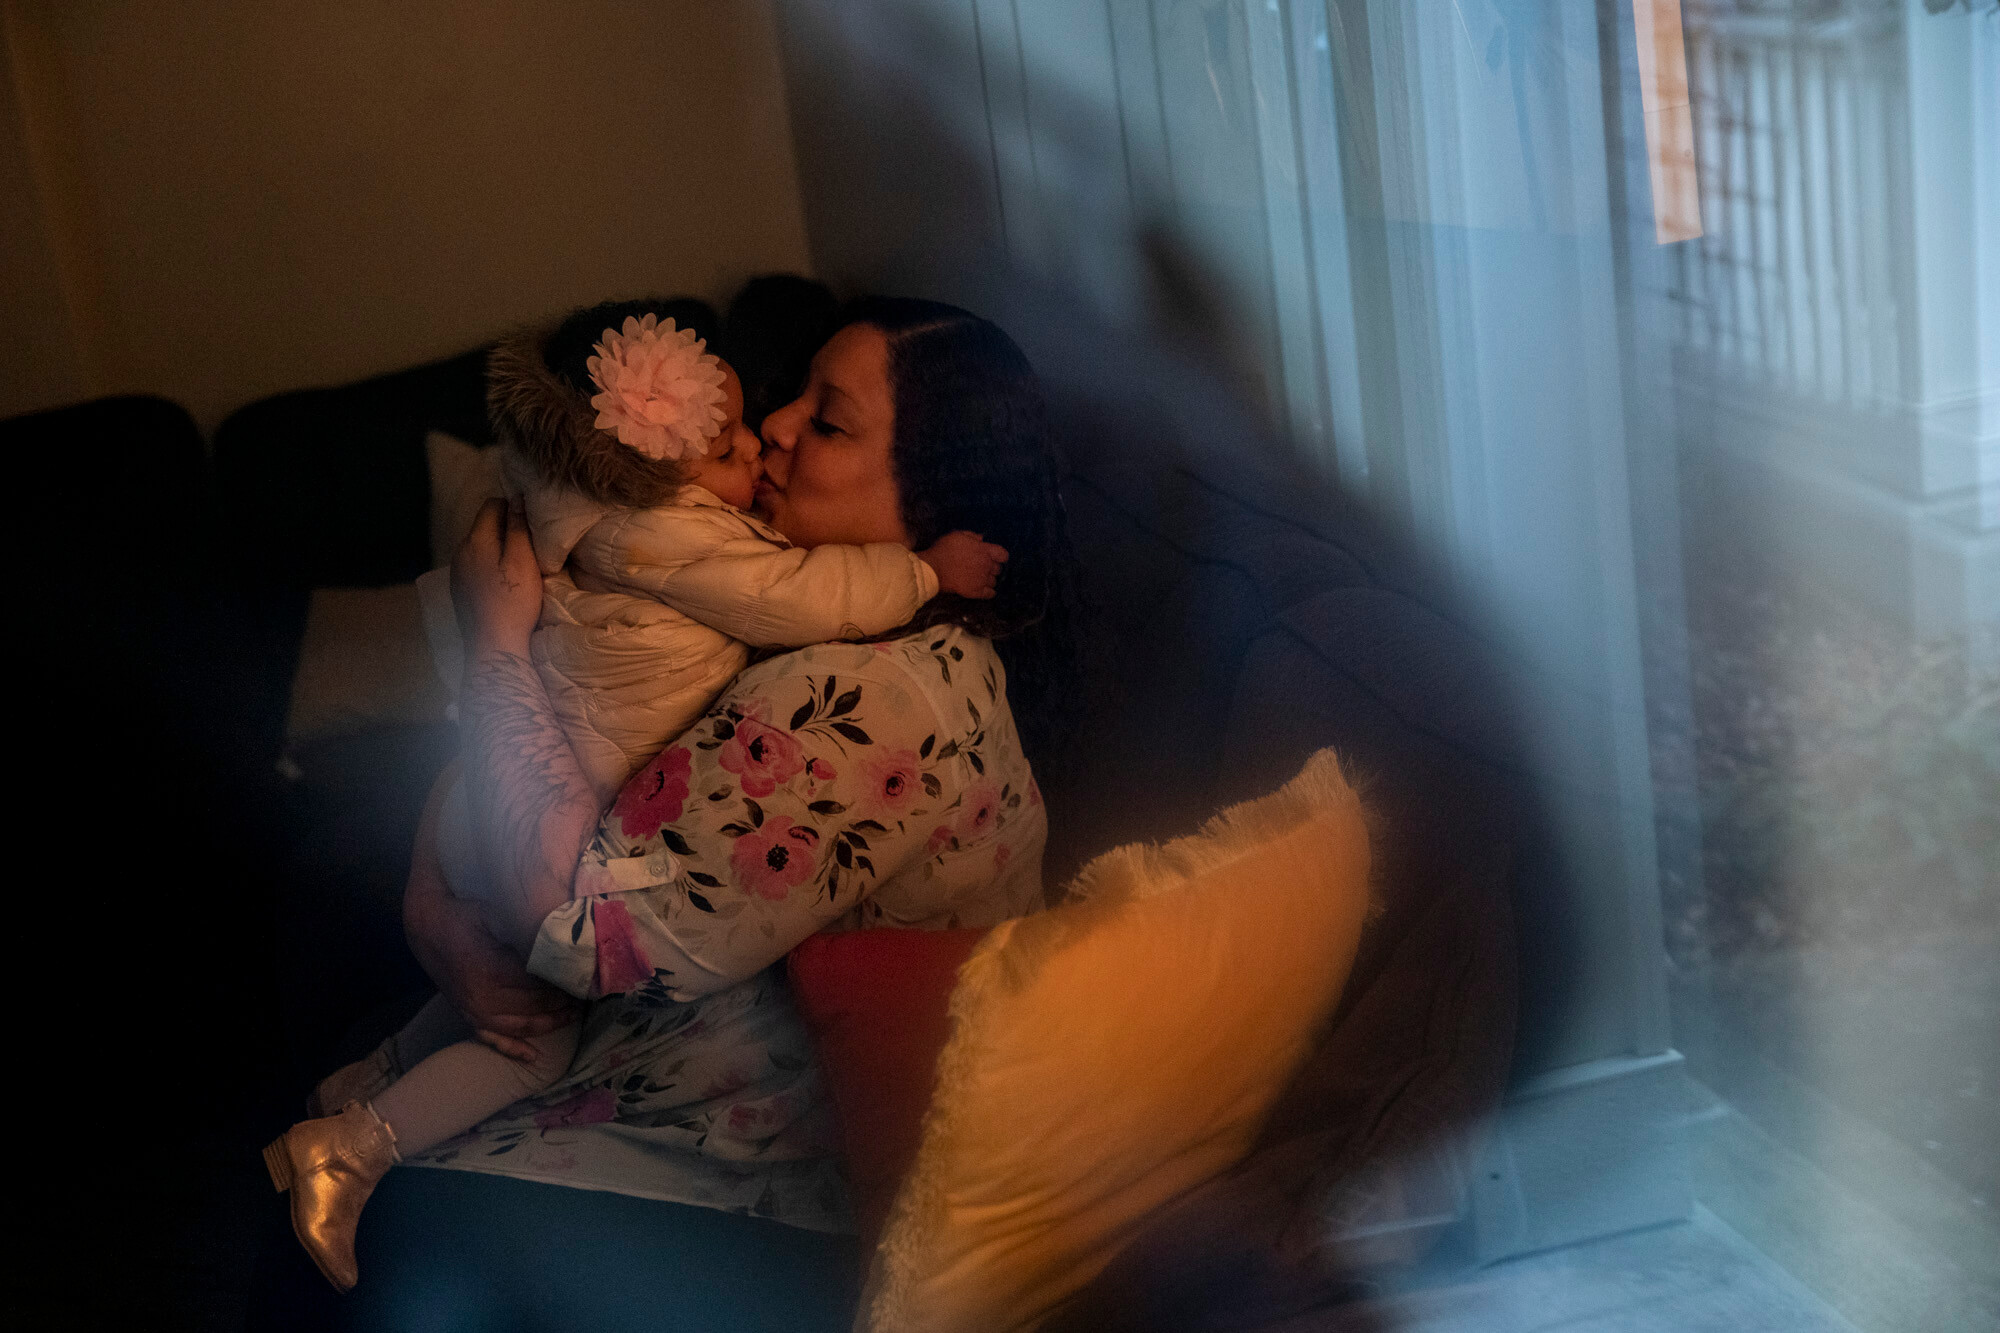 A photo of a mother sitting on a couch indoors, holding her child and kissing her forehead.